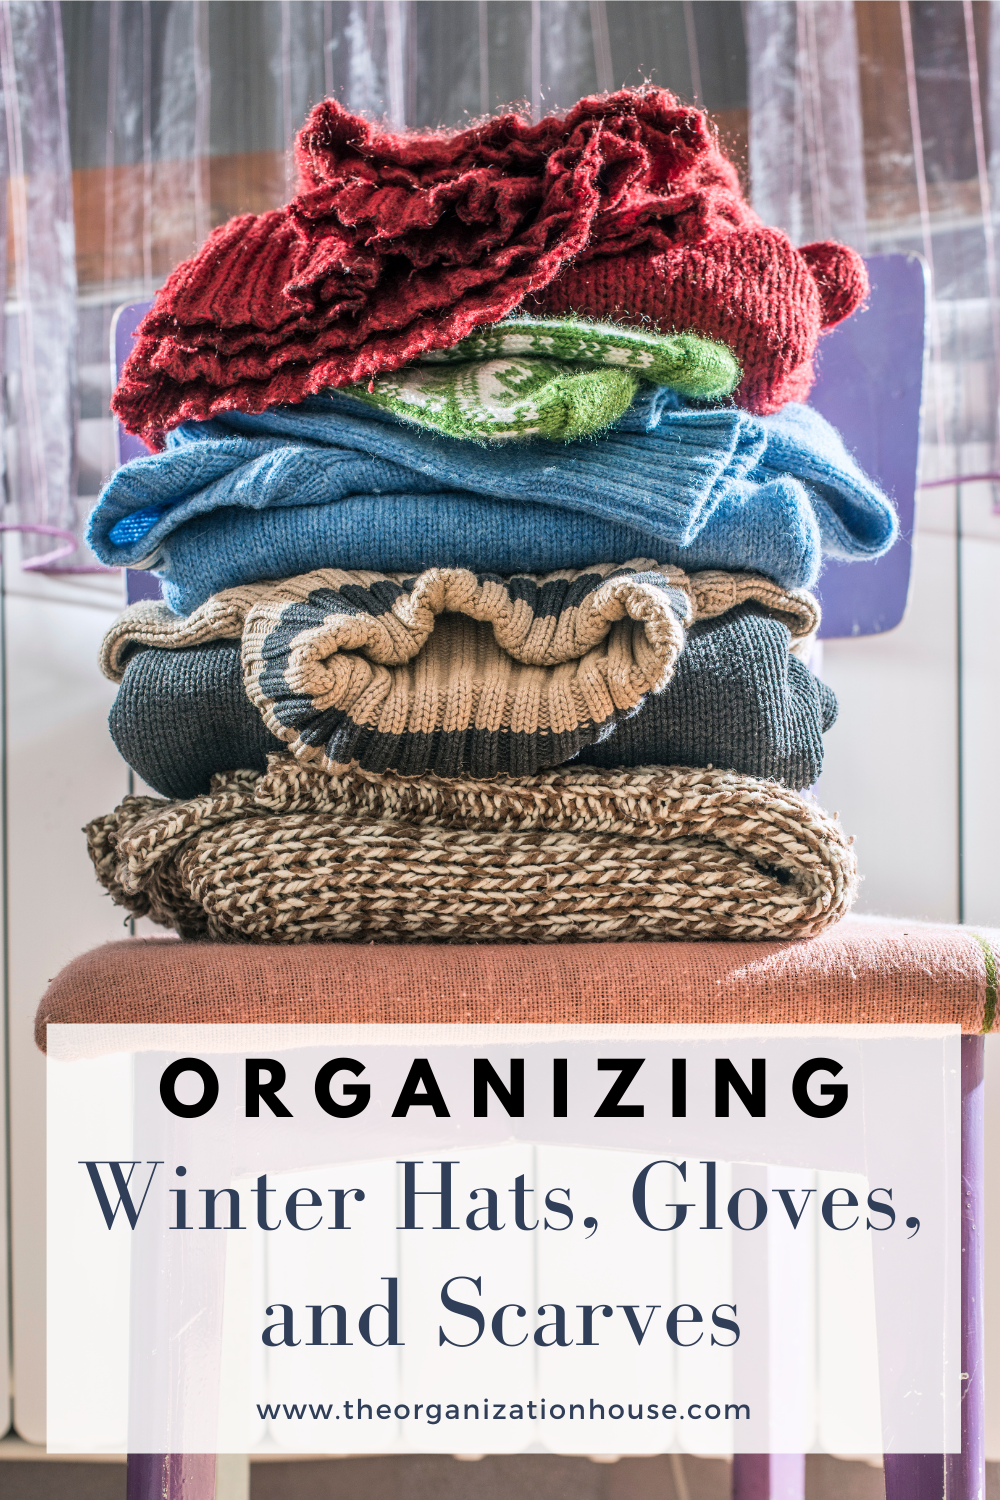 Organizing Winter Hats, Gloves, and Scarves